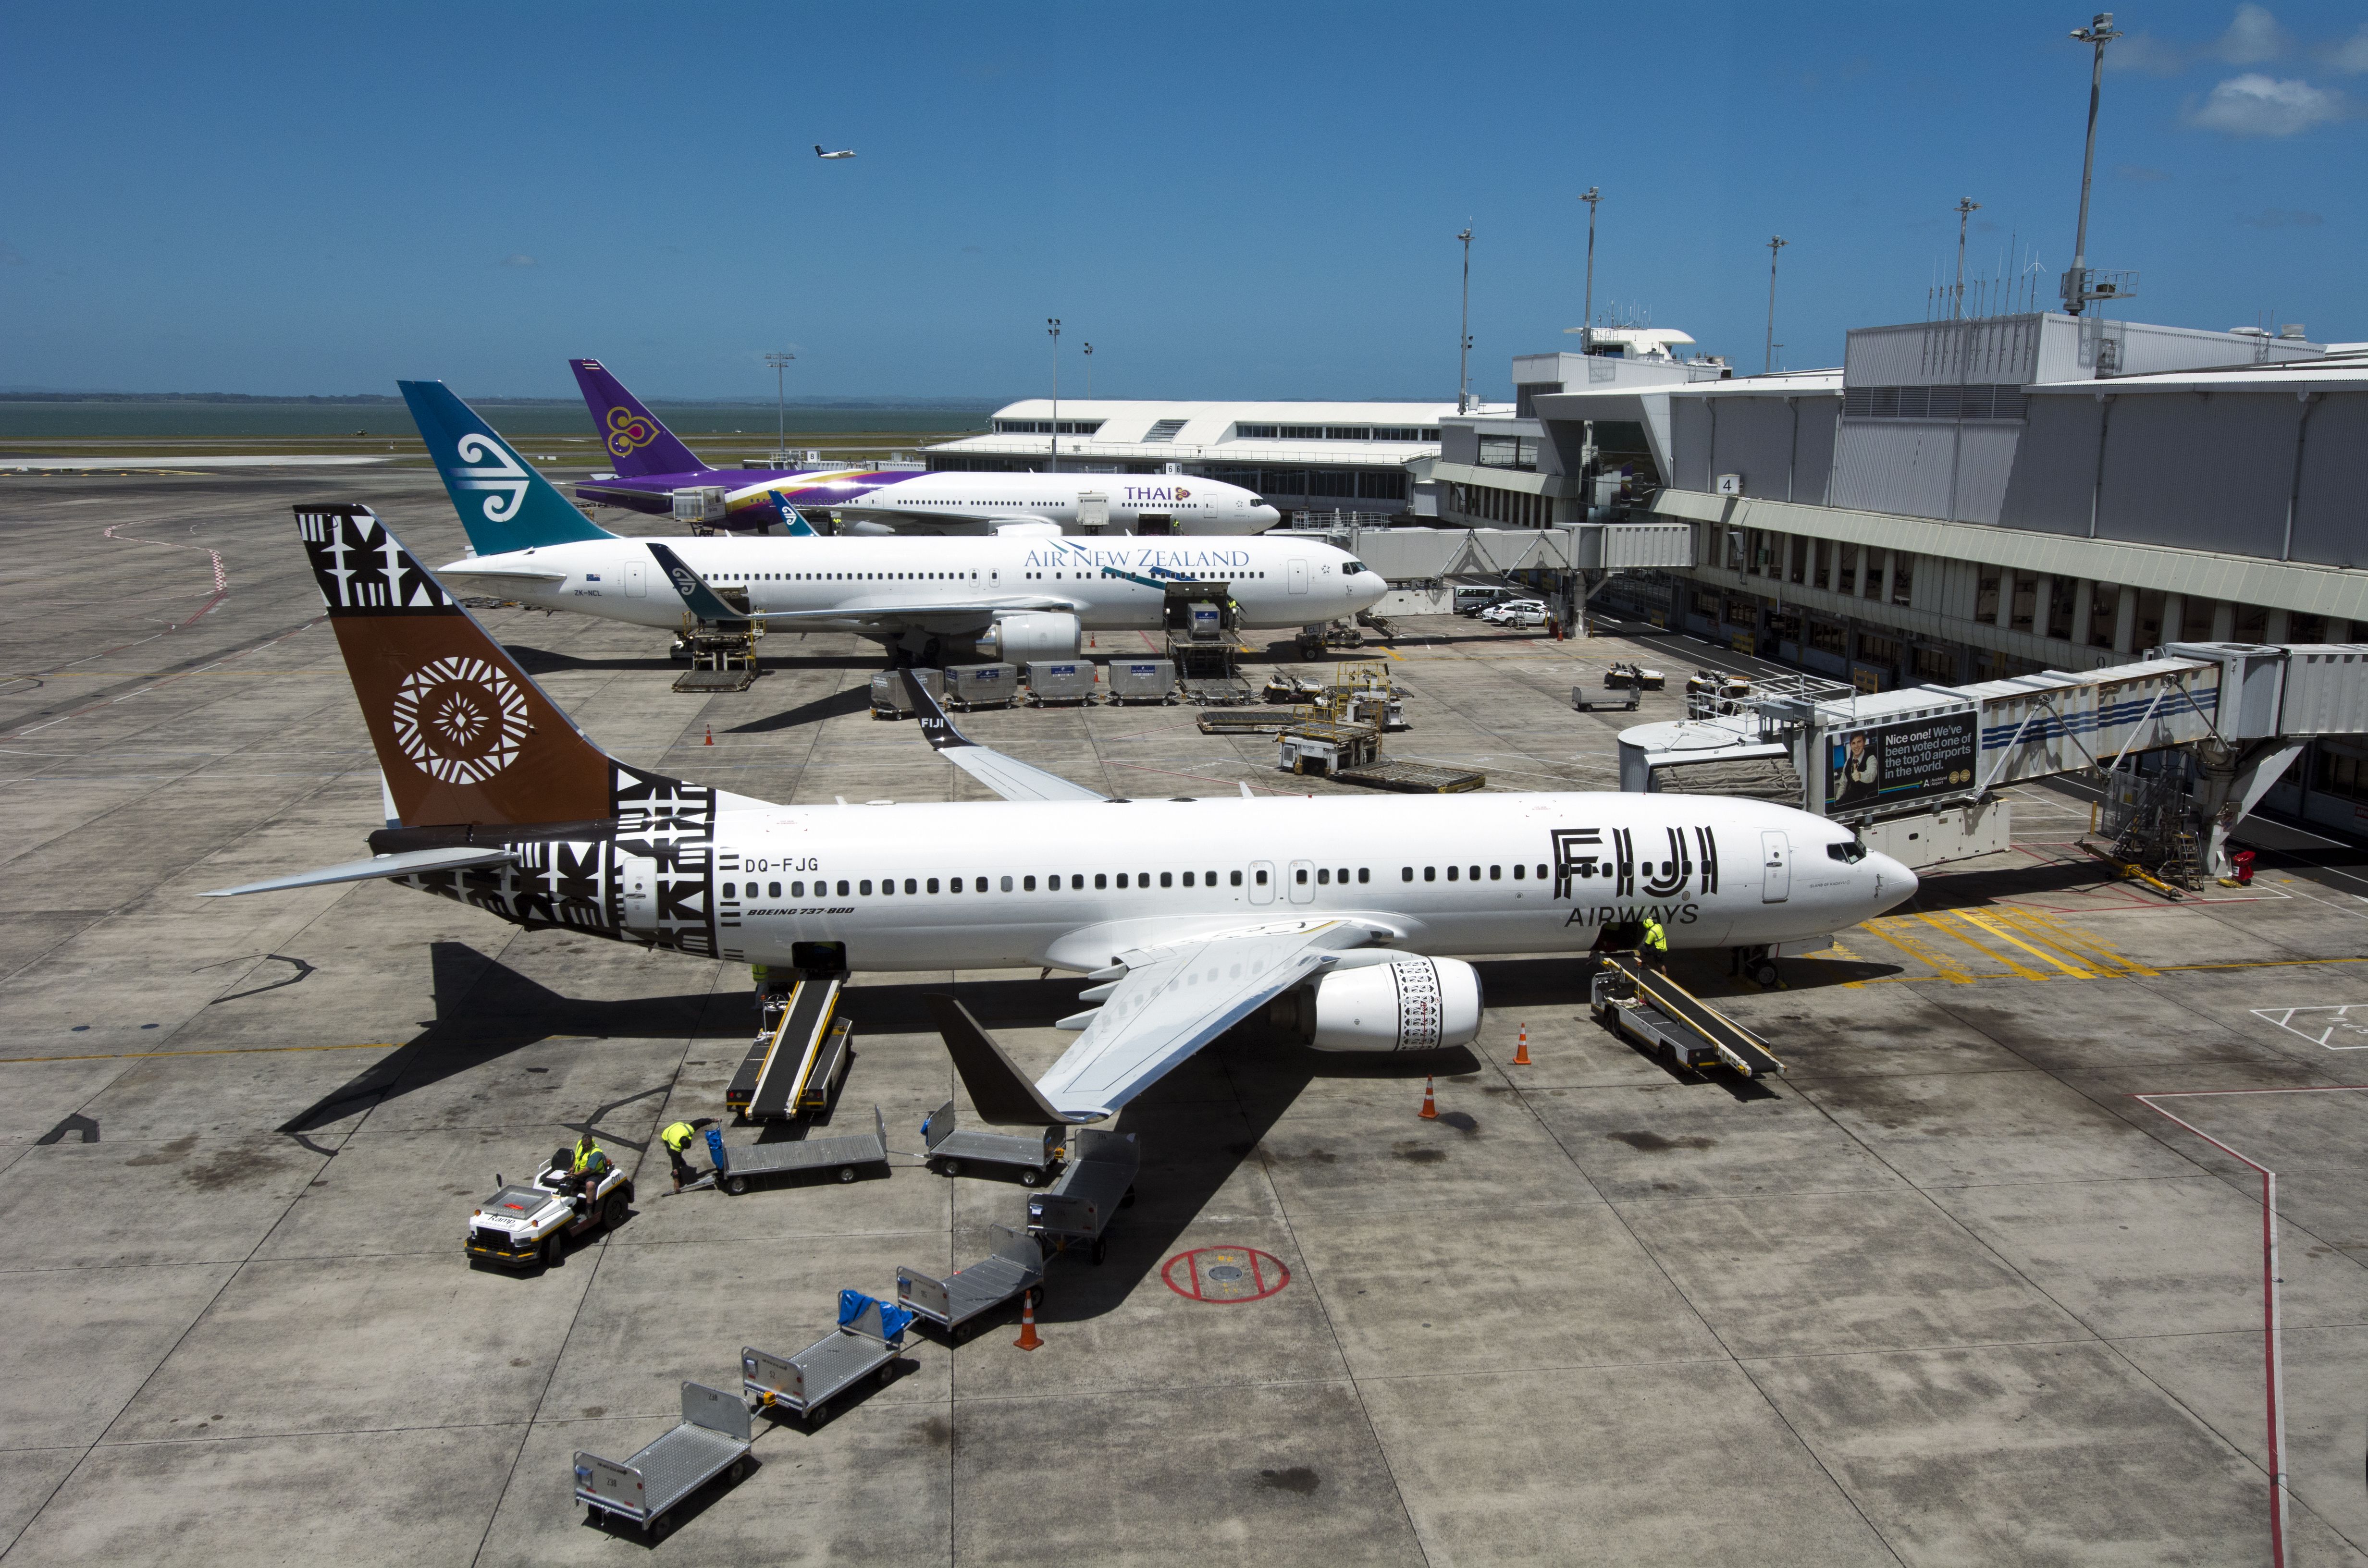 Fiji Airways, Air New Zealand, and Thai Airways Aircraft parked at Auckland Airport gates.